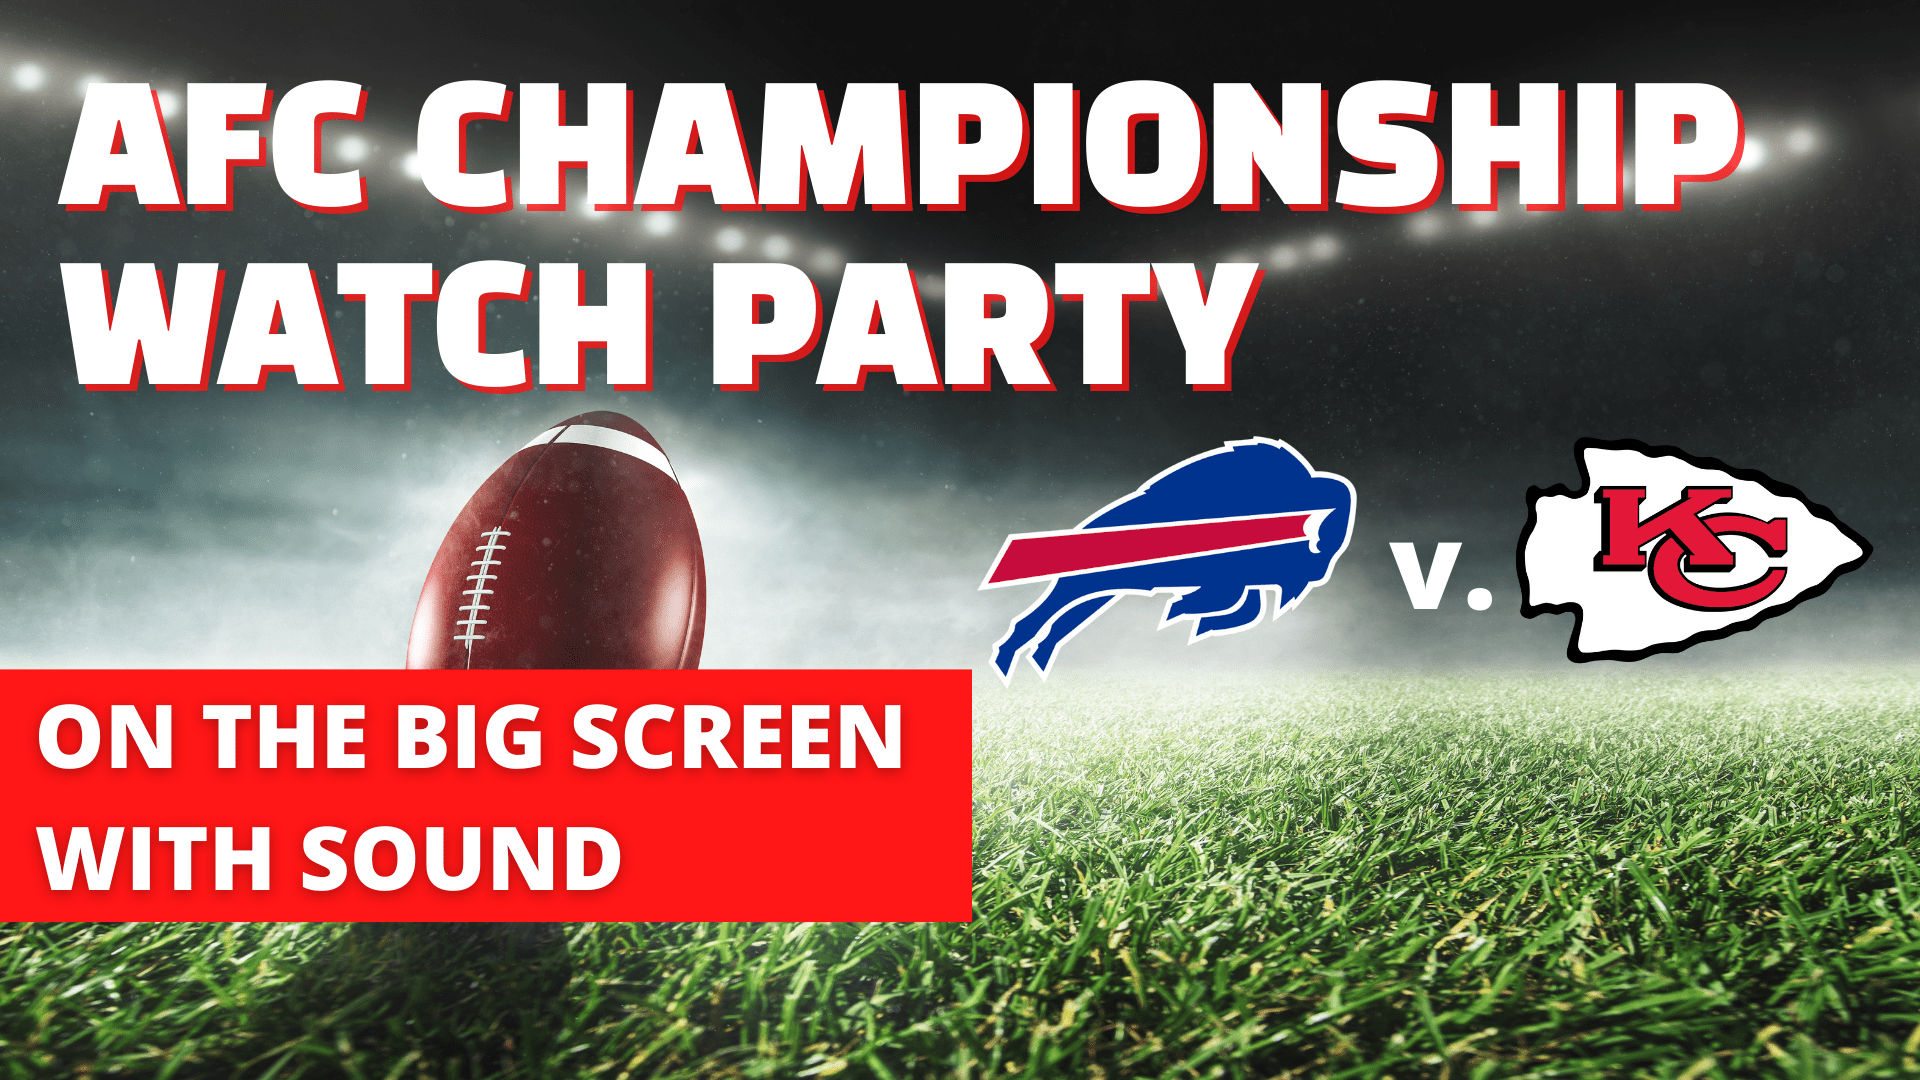 AFC Championship Watch Party - hero